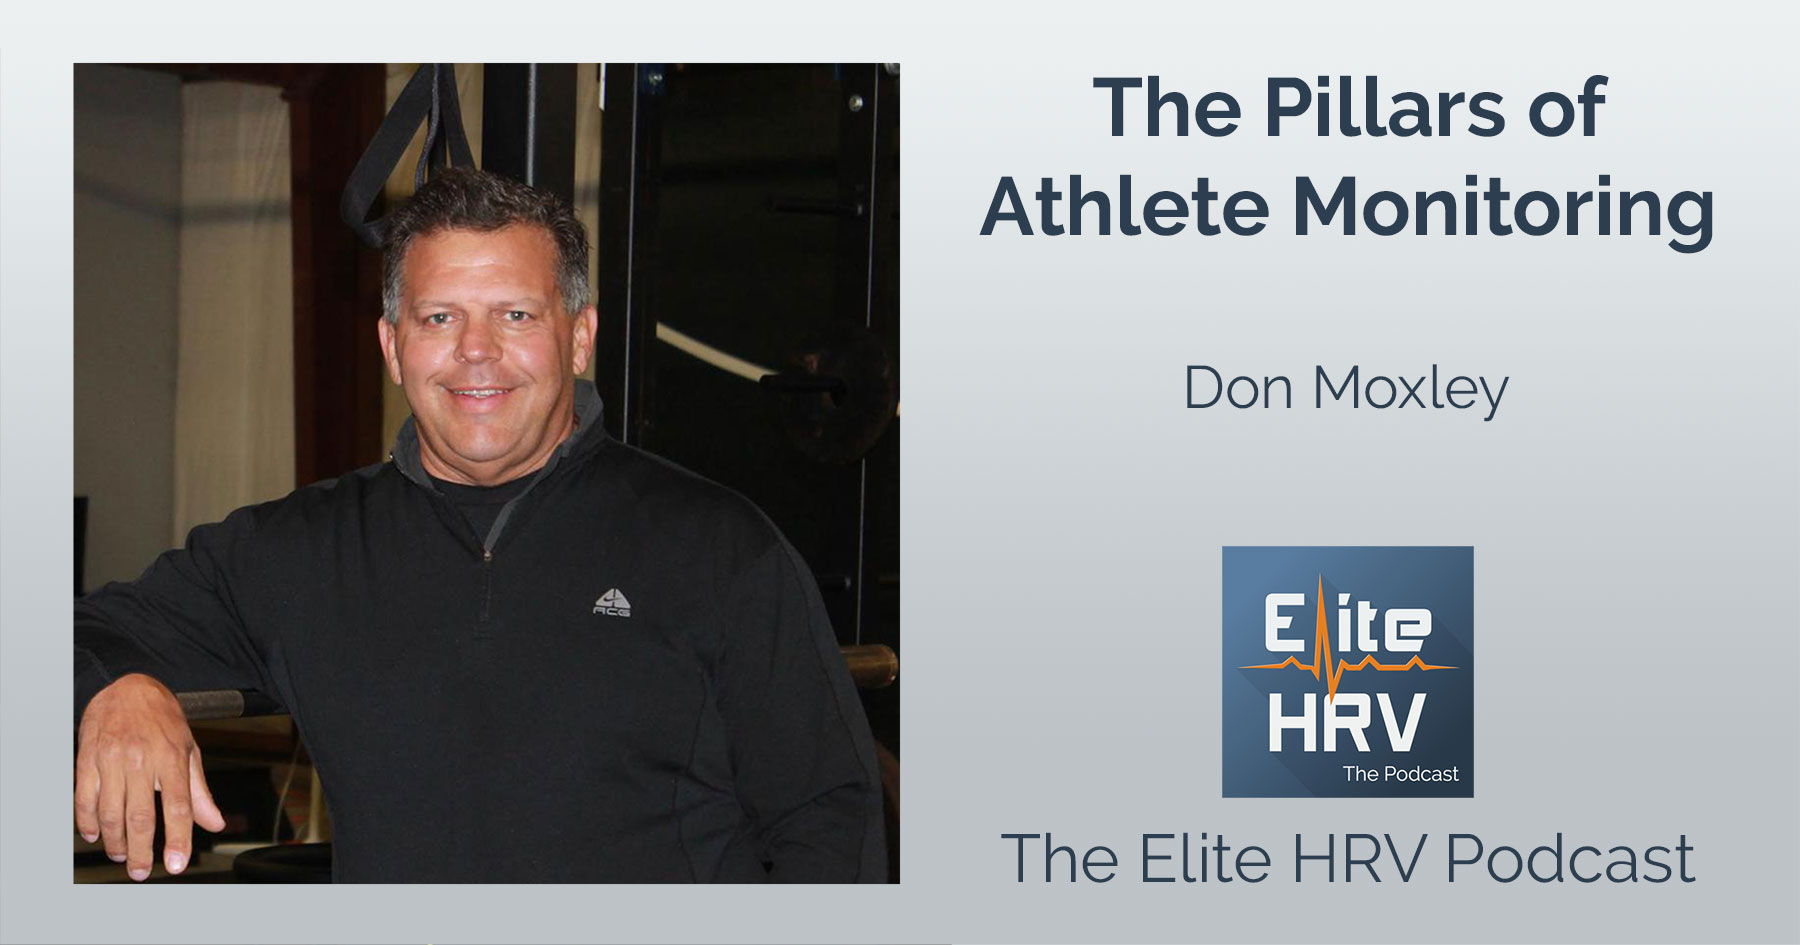 The Pillars of Athlete Monitoring with Don Moxley